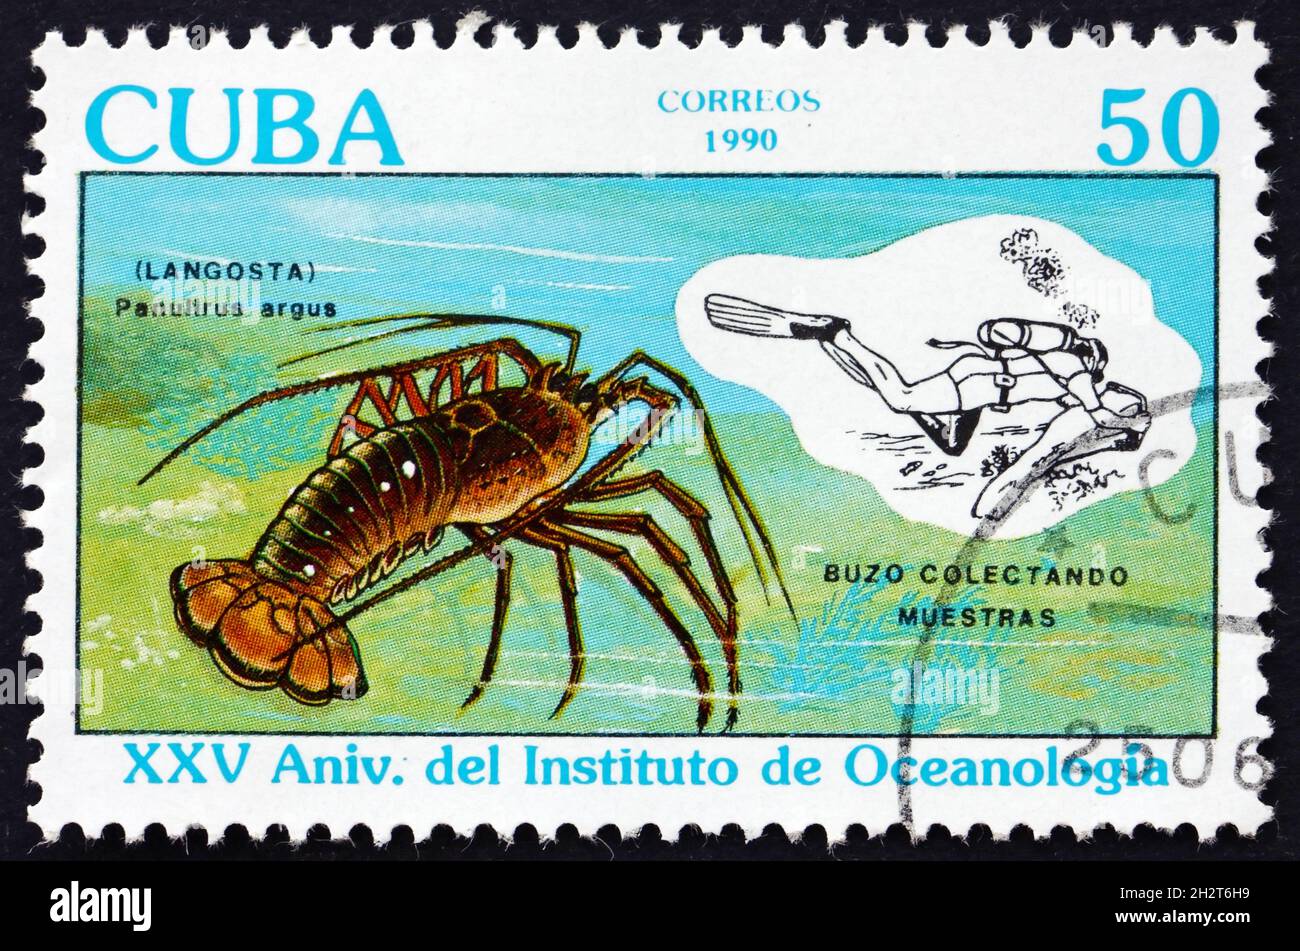 CUBA - CIRCA 1990: a stamp printed in Cuba shows Caribbean spiny lobster, panulirus argus, and specimen collection, 25th anniversary of the Oceanograp Stock Photo